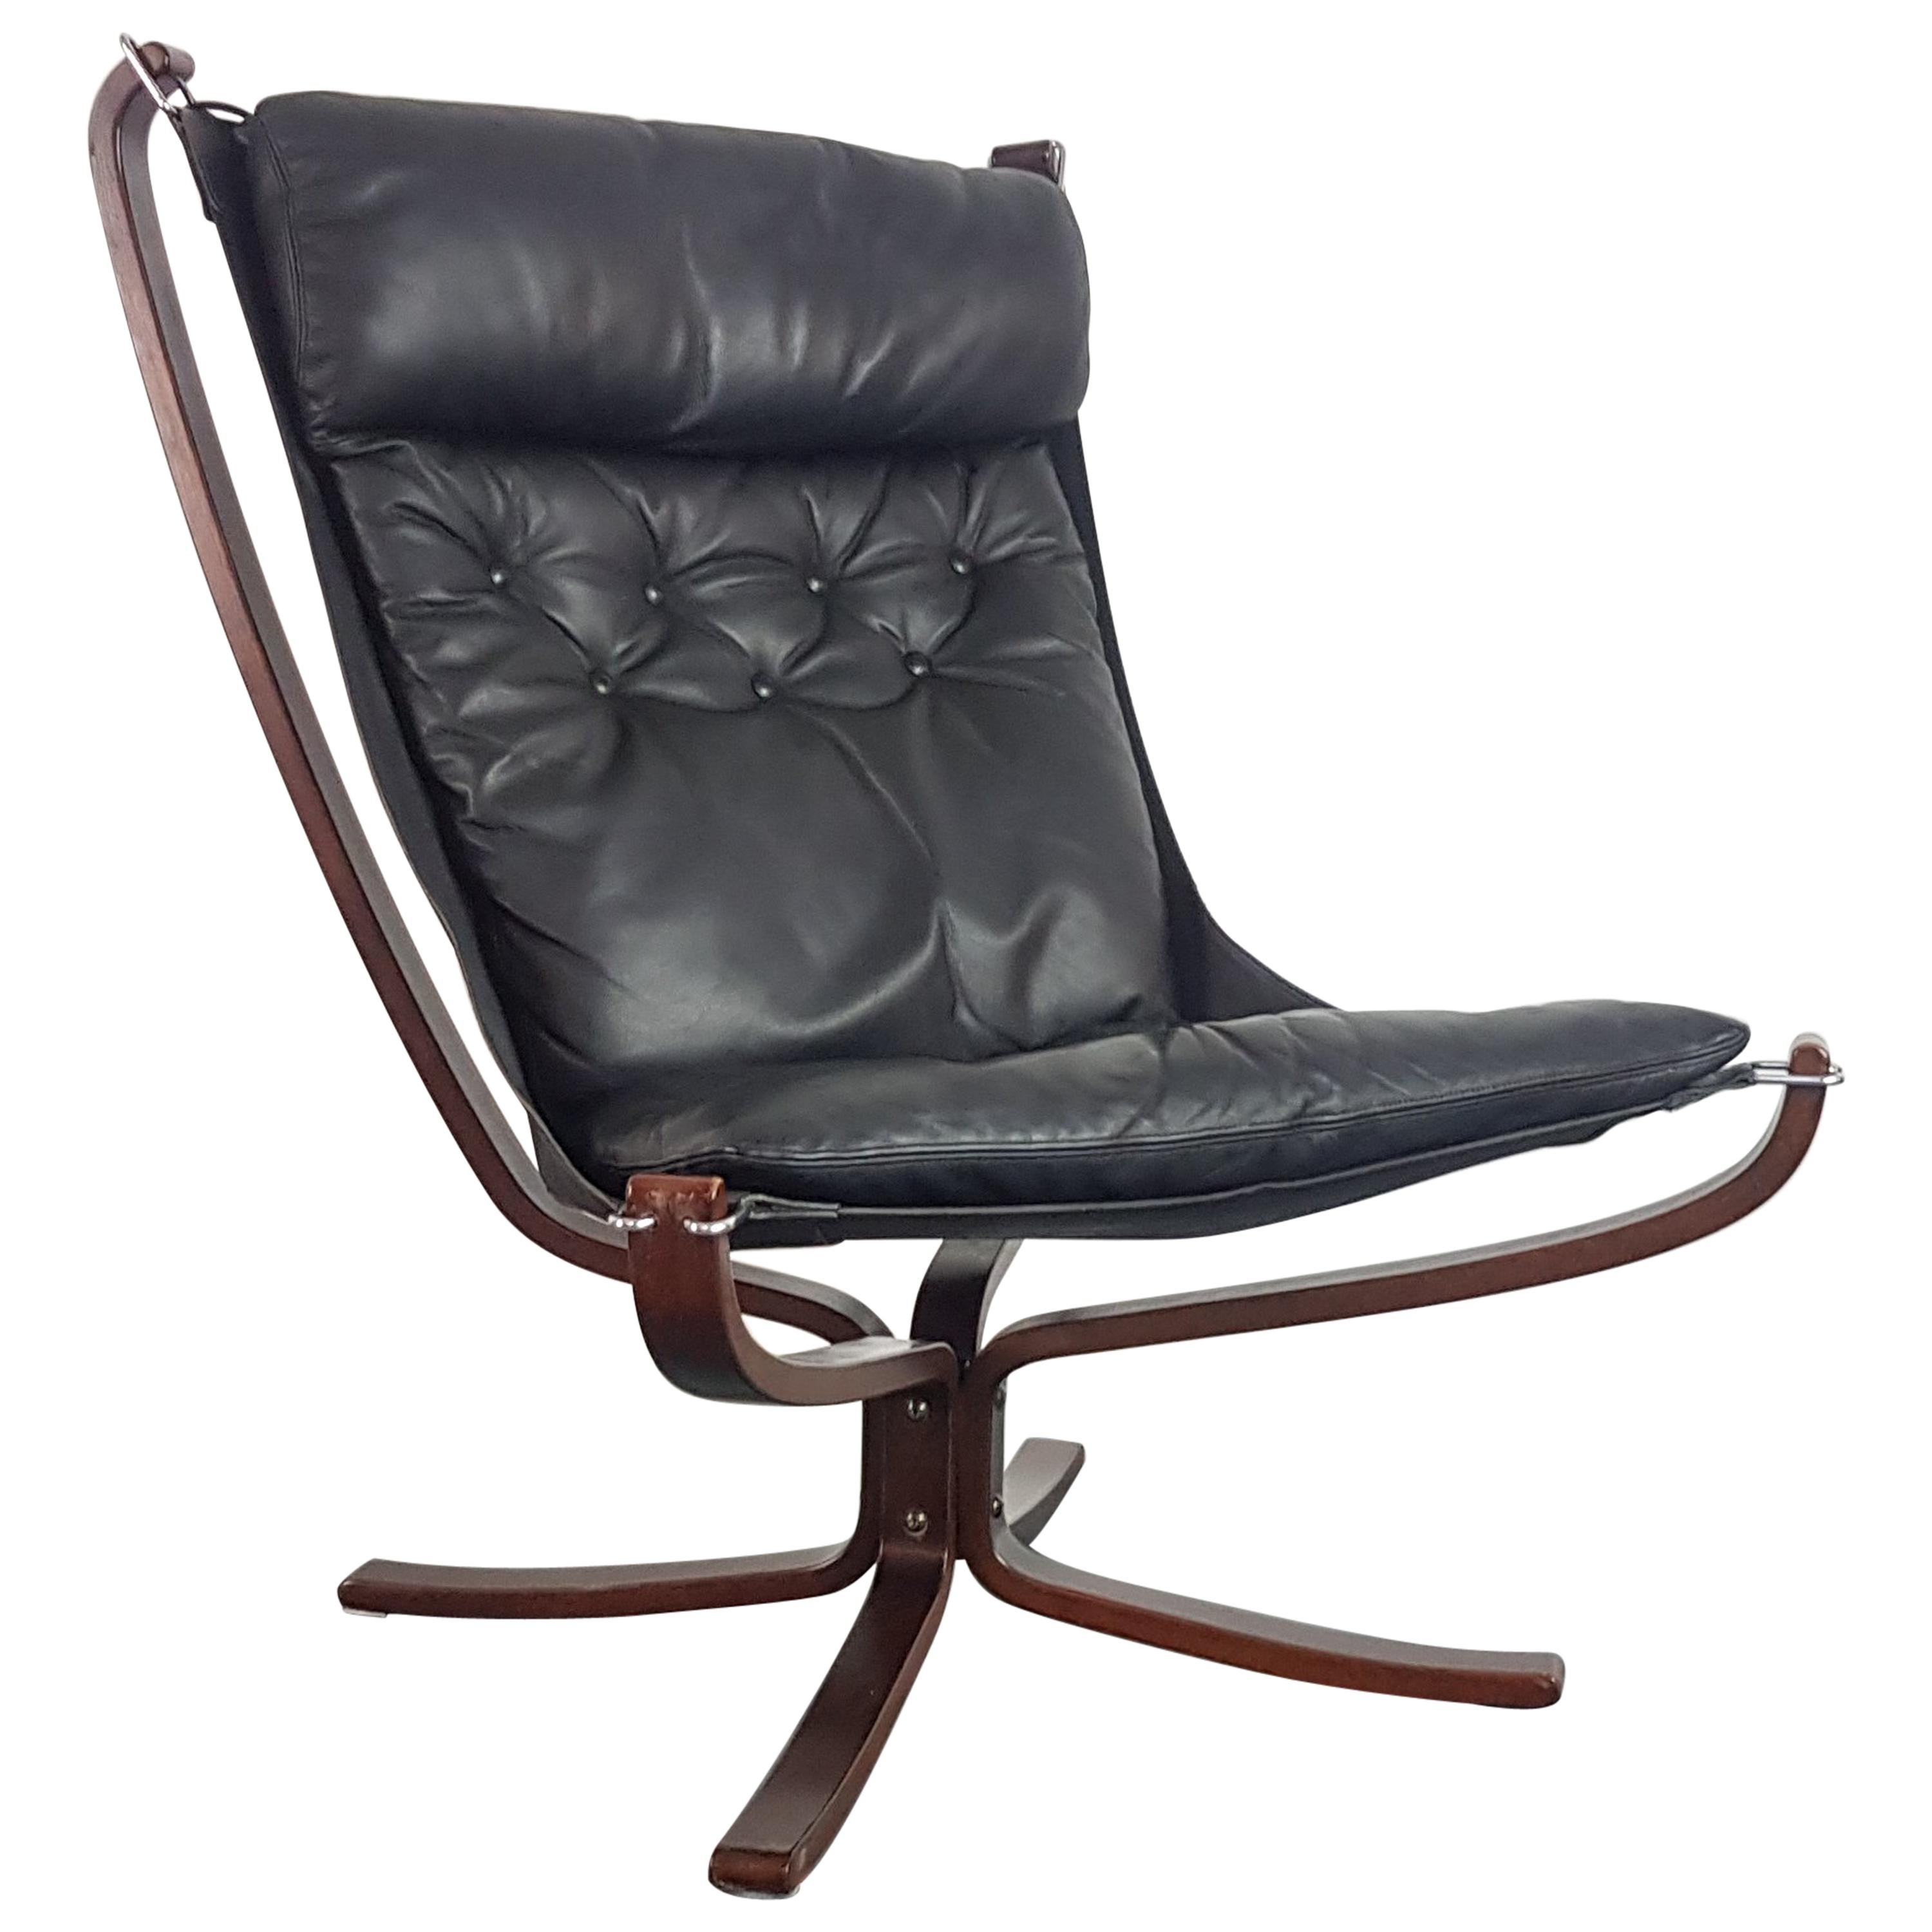 Vintage 1970s High Back Black Leather Falcon Chair Designed by Sigurd Resell